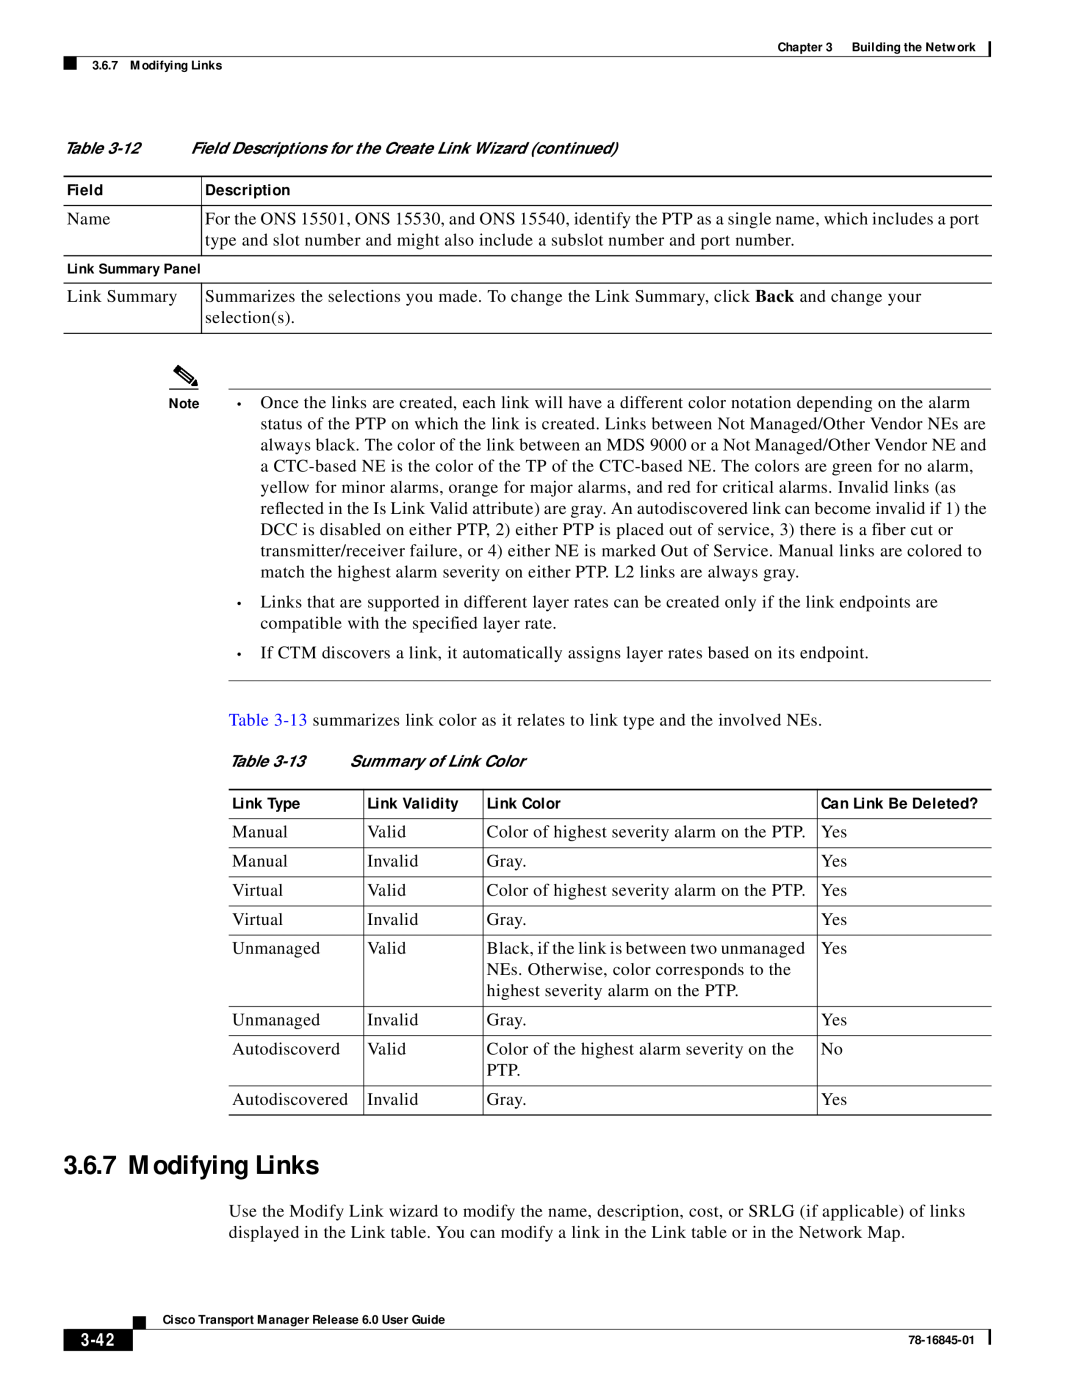 Cisco Systems 78-16845-01 manual Modifying Links, 3-42, 12 Field Descriptions for the Create Link Wizard continued 